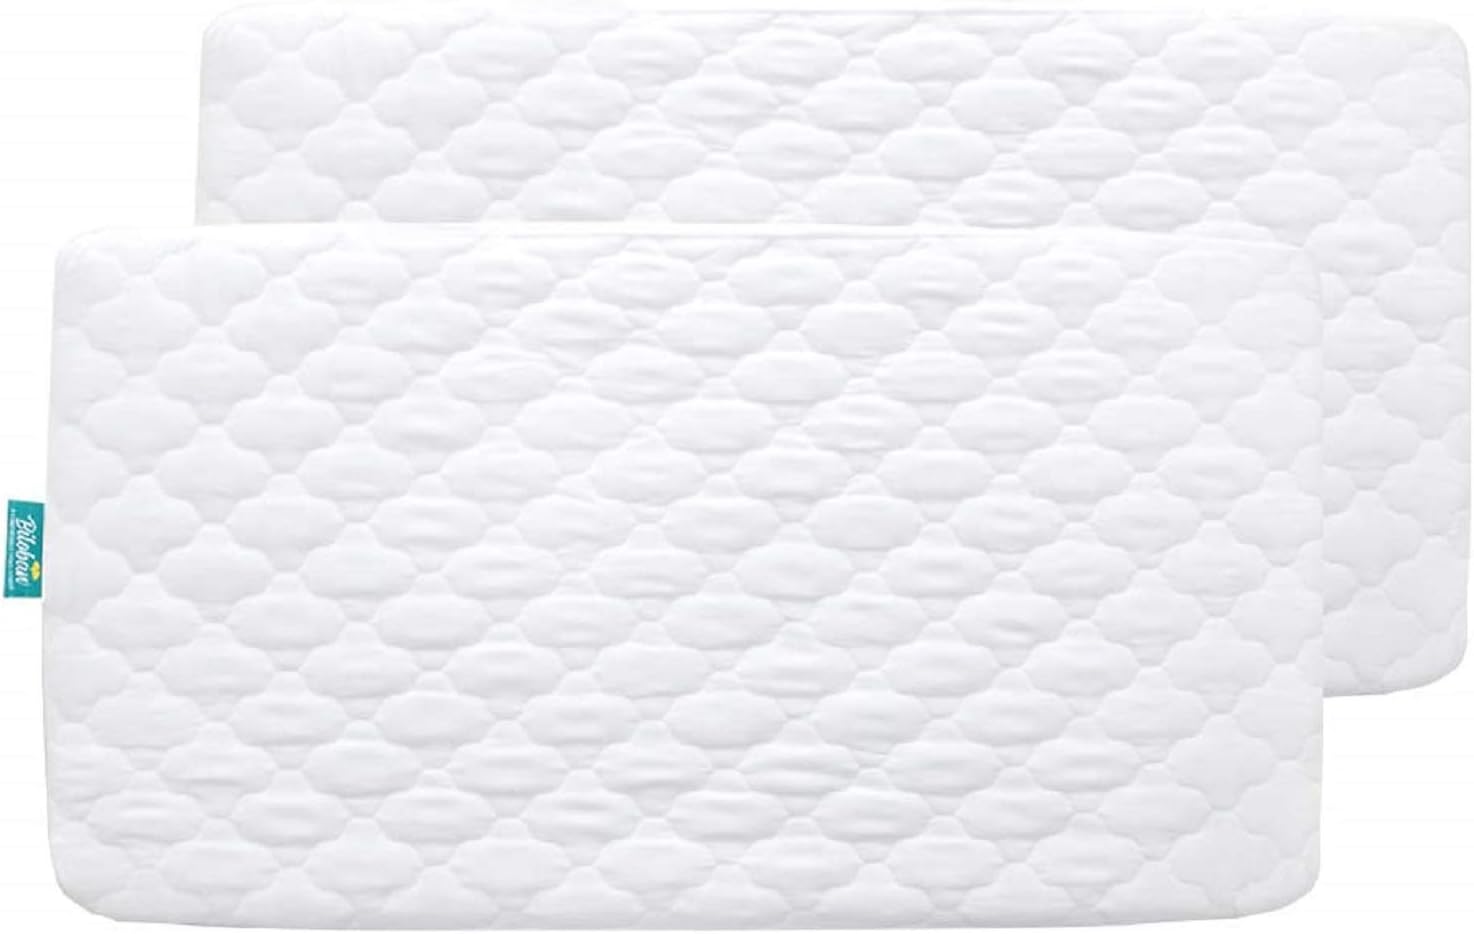 Crib Mattress Protector/ Pad Cover - 2 Pack, Ultra Soft Microfiber, Waterproof (for Standard Crib/ Toddler Bed), White - Biloban Online Store